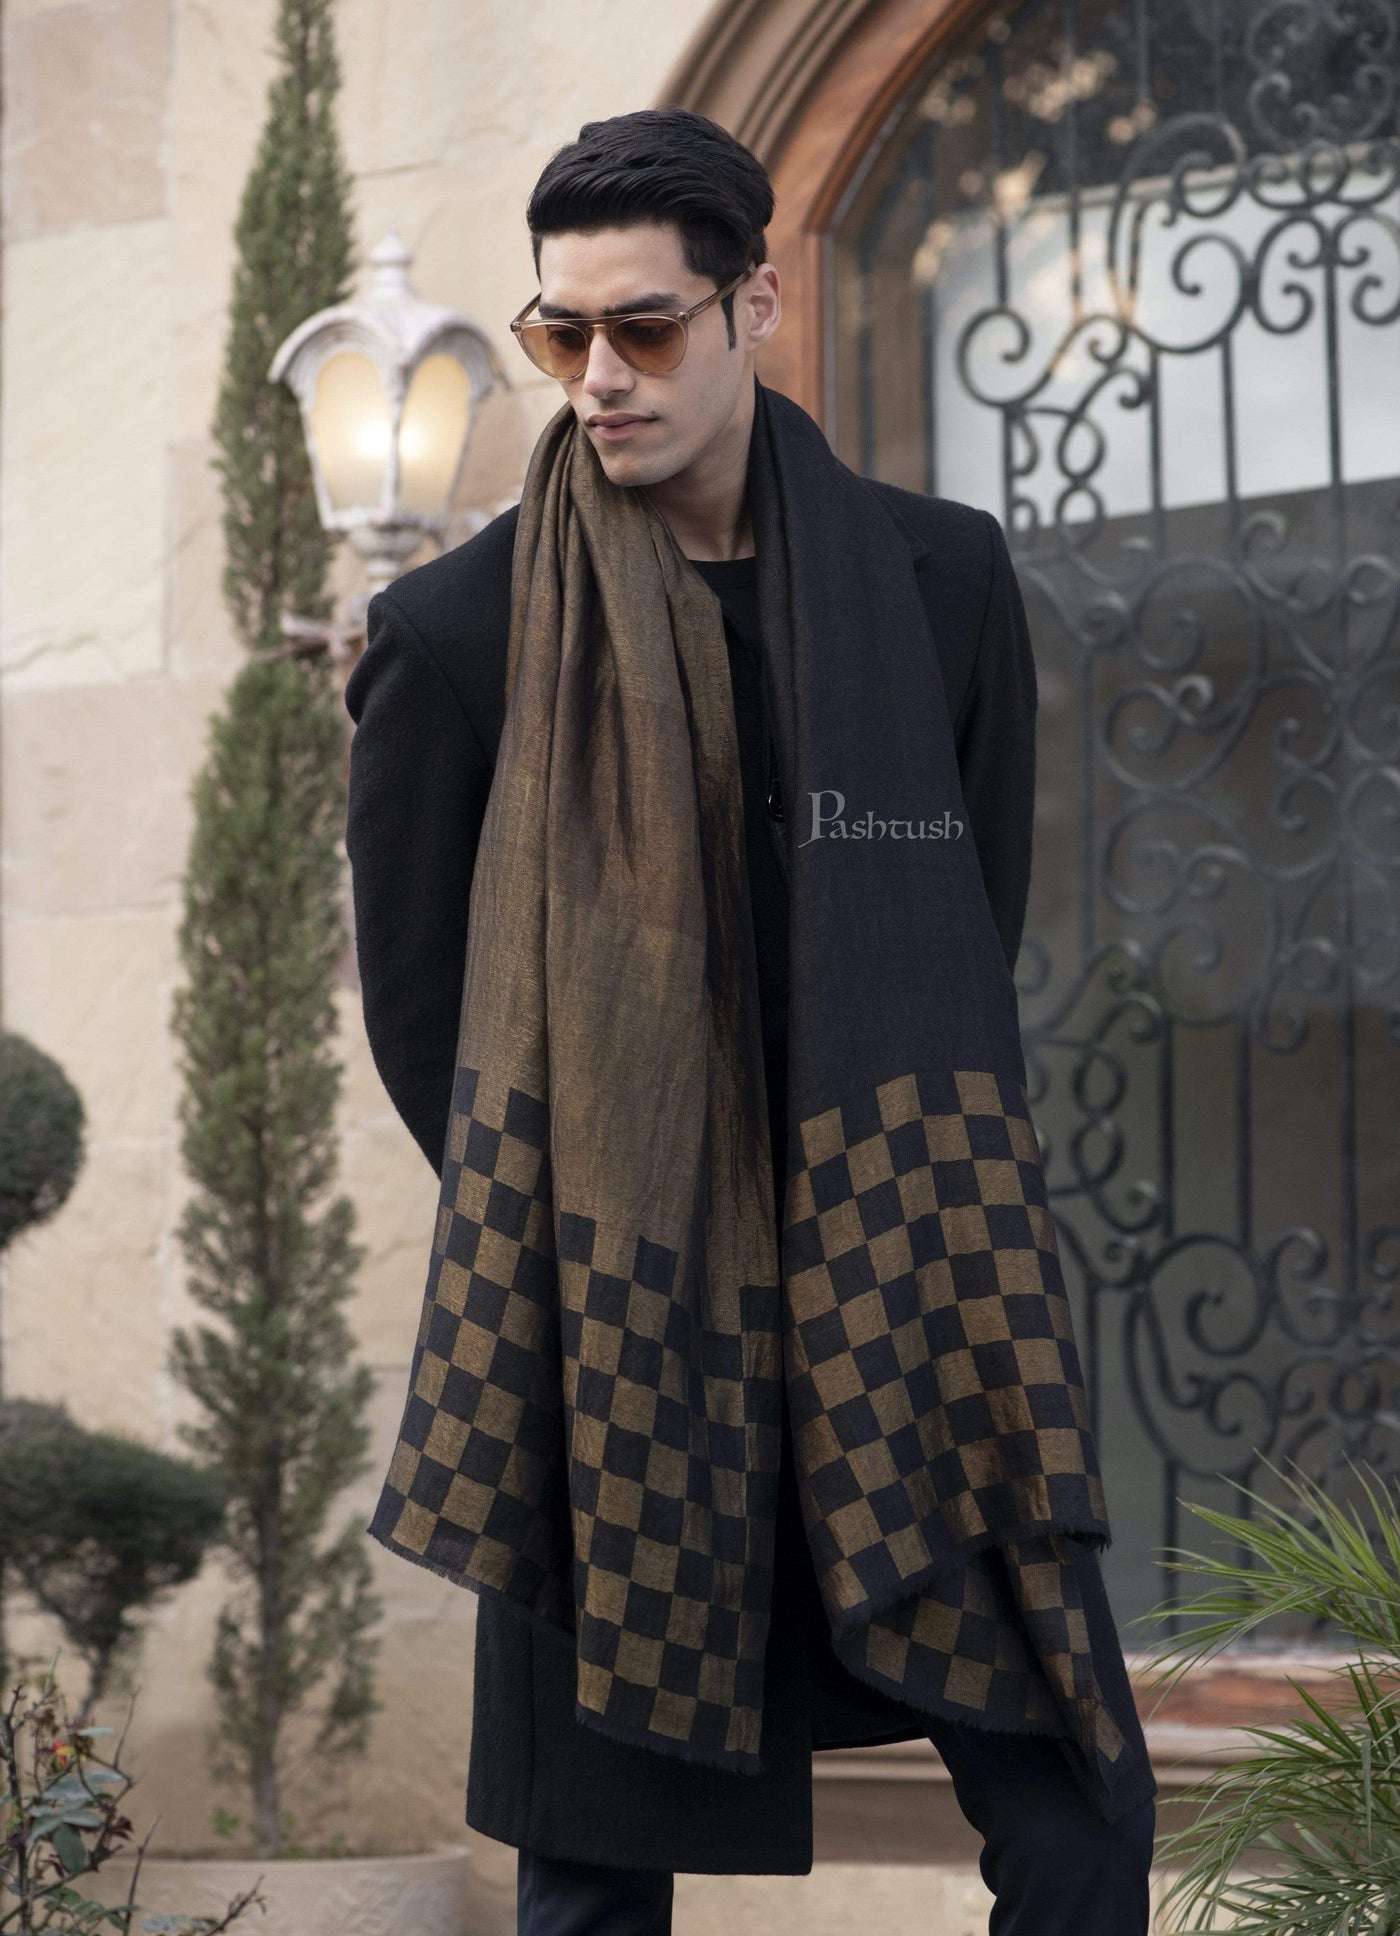 Pashtush Mens Checkered Scarf, With Metallic Thread Weave, Black And G ...